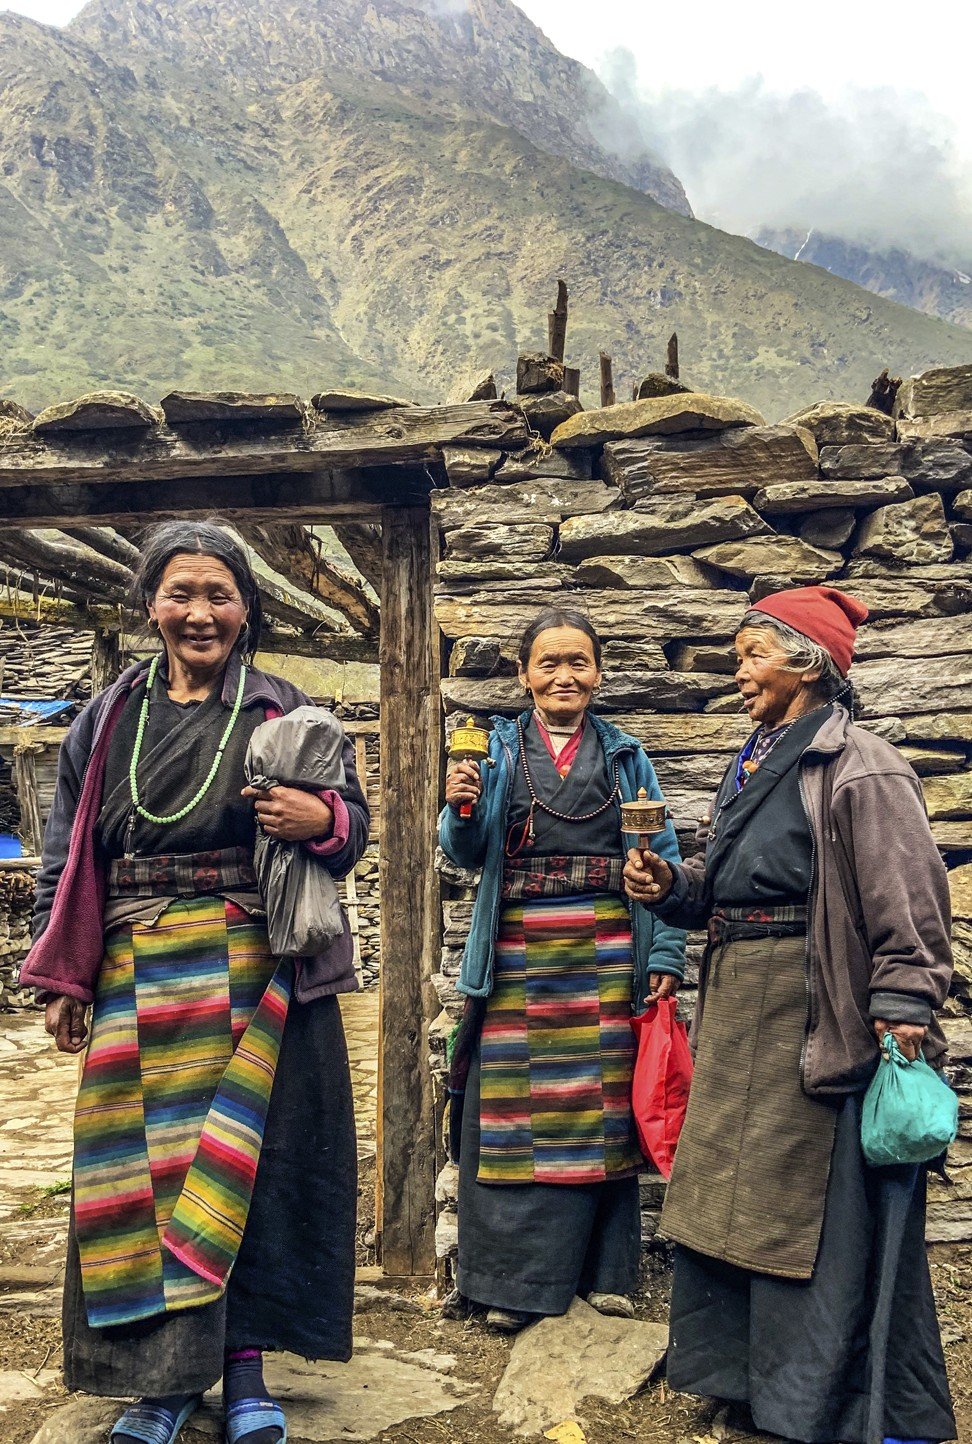 Nubri women wearing typical Tibetan-style dresses on their way to an eye-screening clinic. Photo: Cathryn Donohue